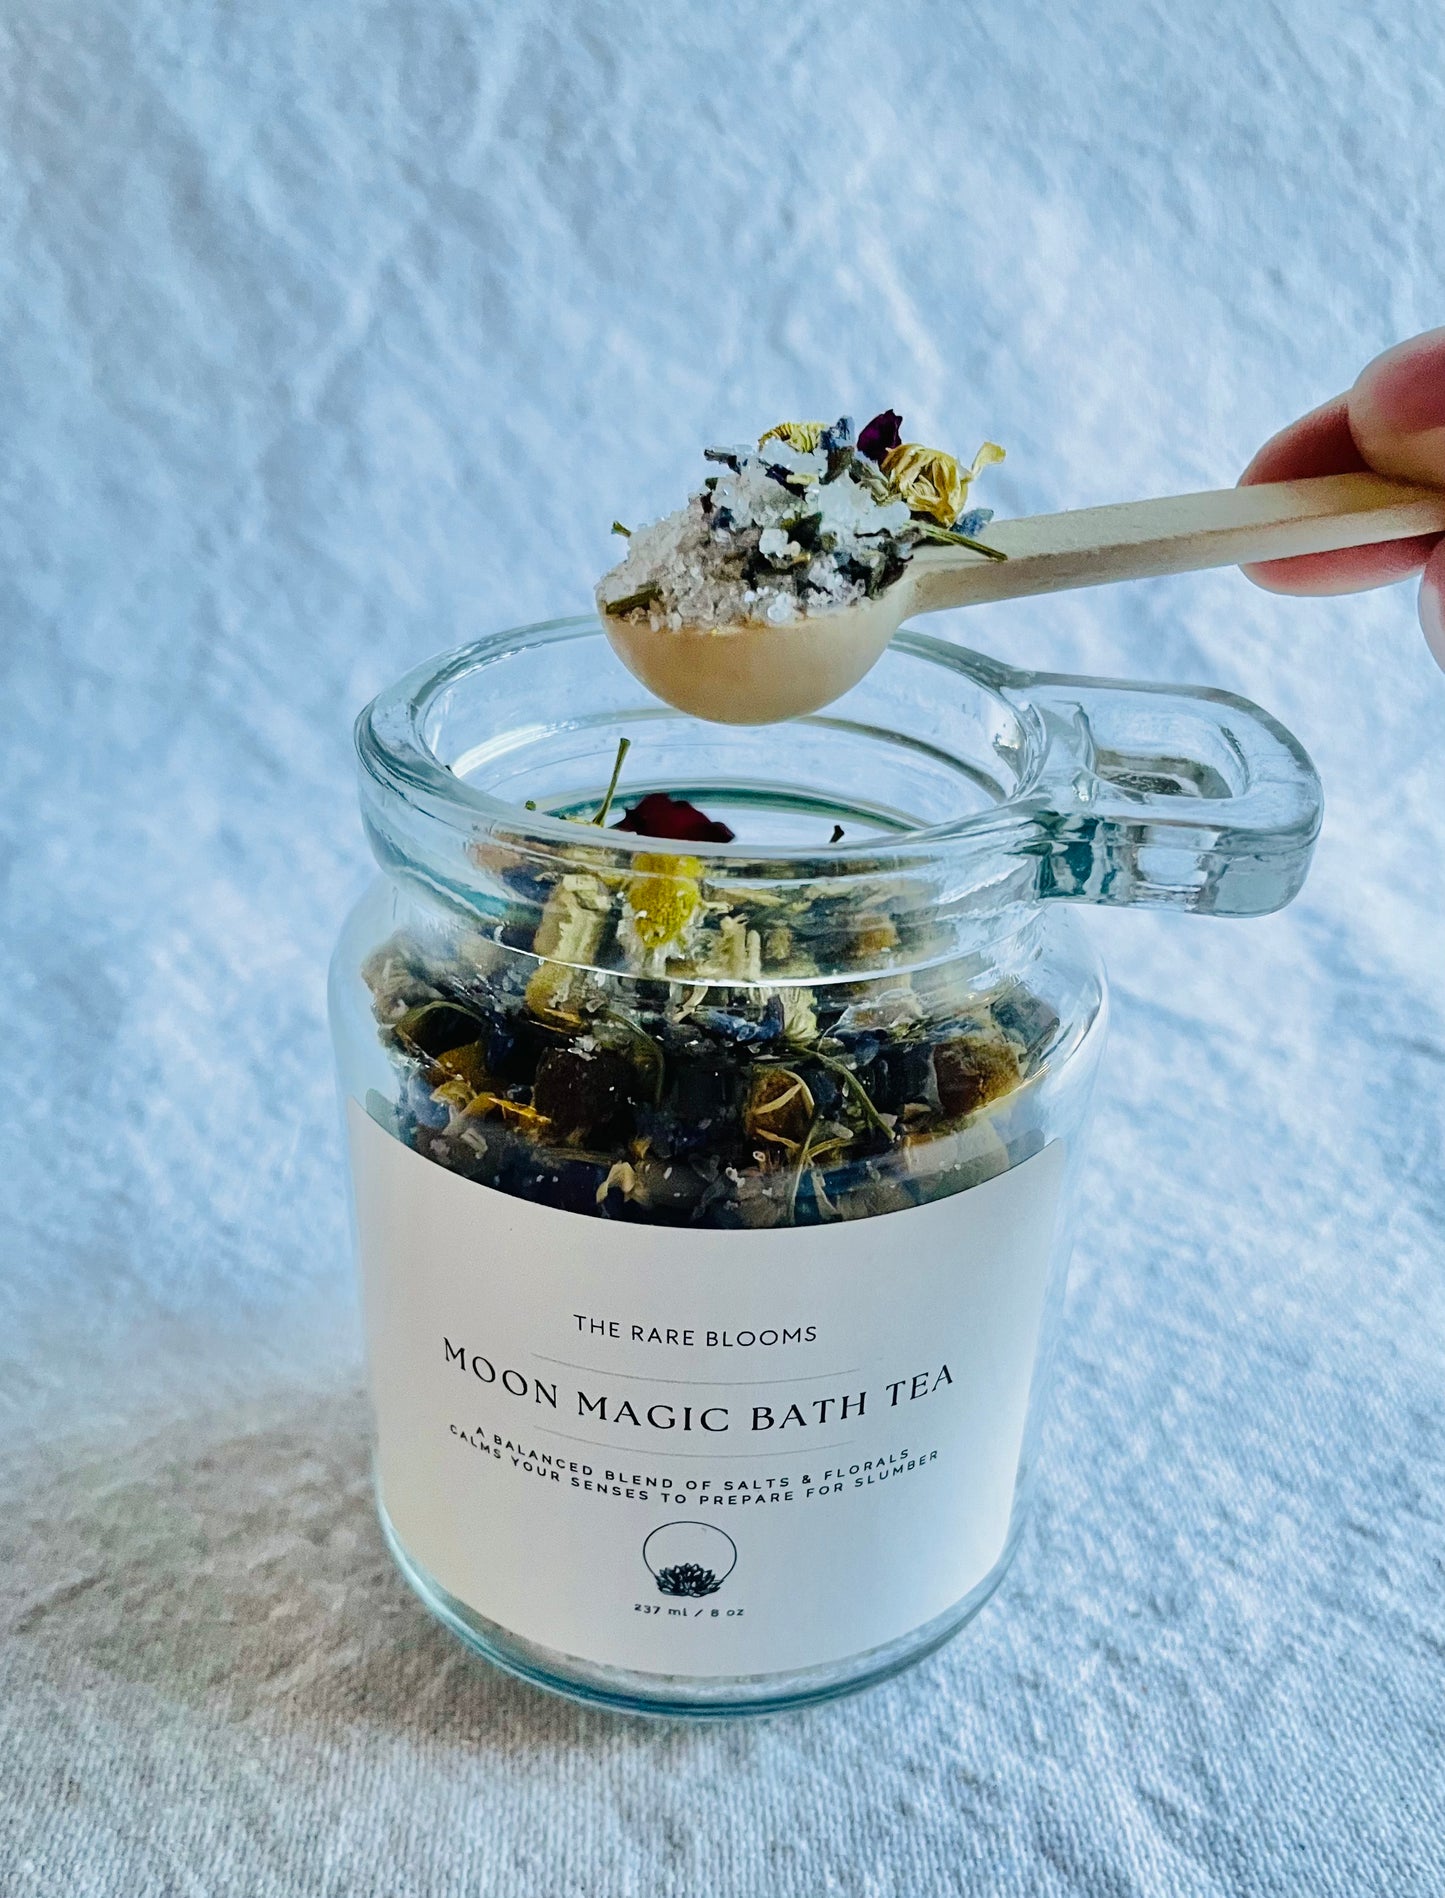 Moon Magic Bath Tea for your bath time self care ritual. A balanced blend of salts and florals to calm the senses and prepare for slumber.